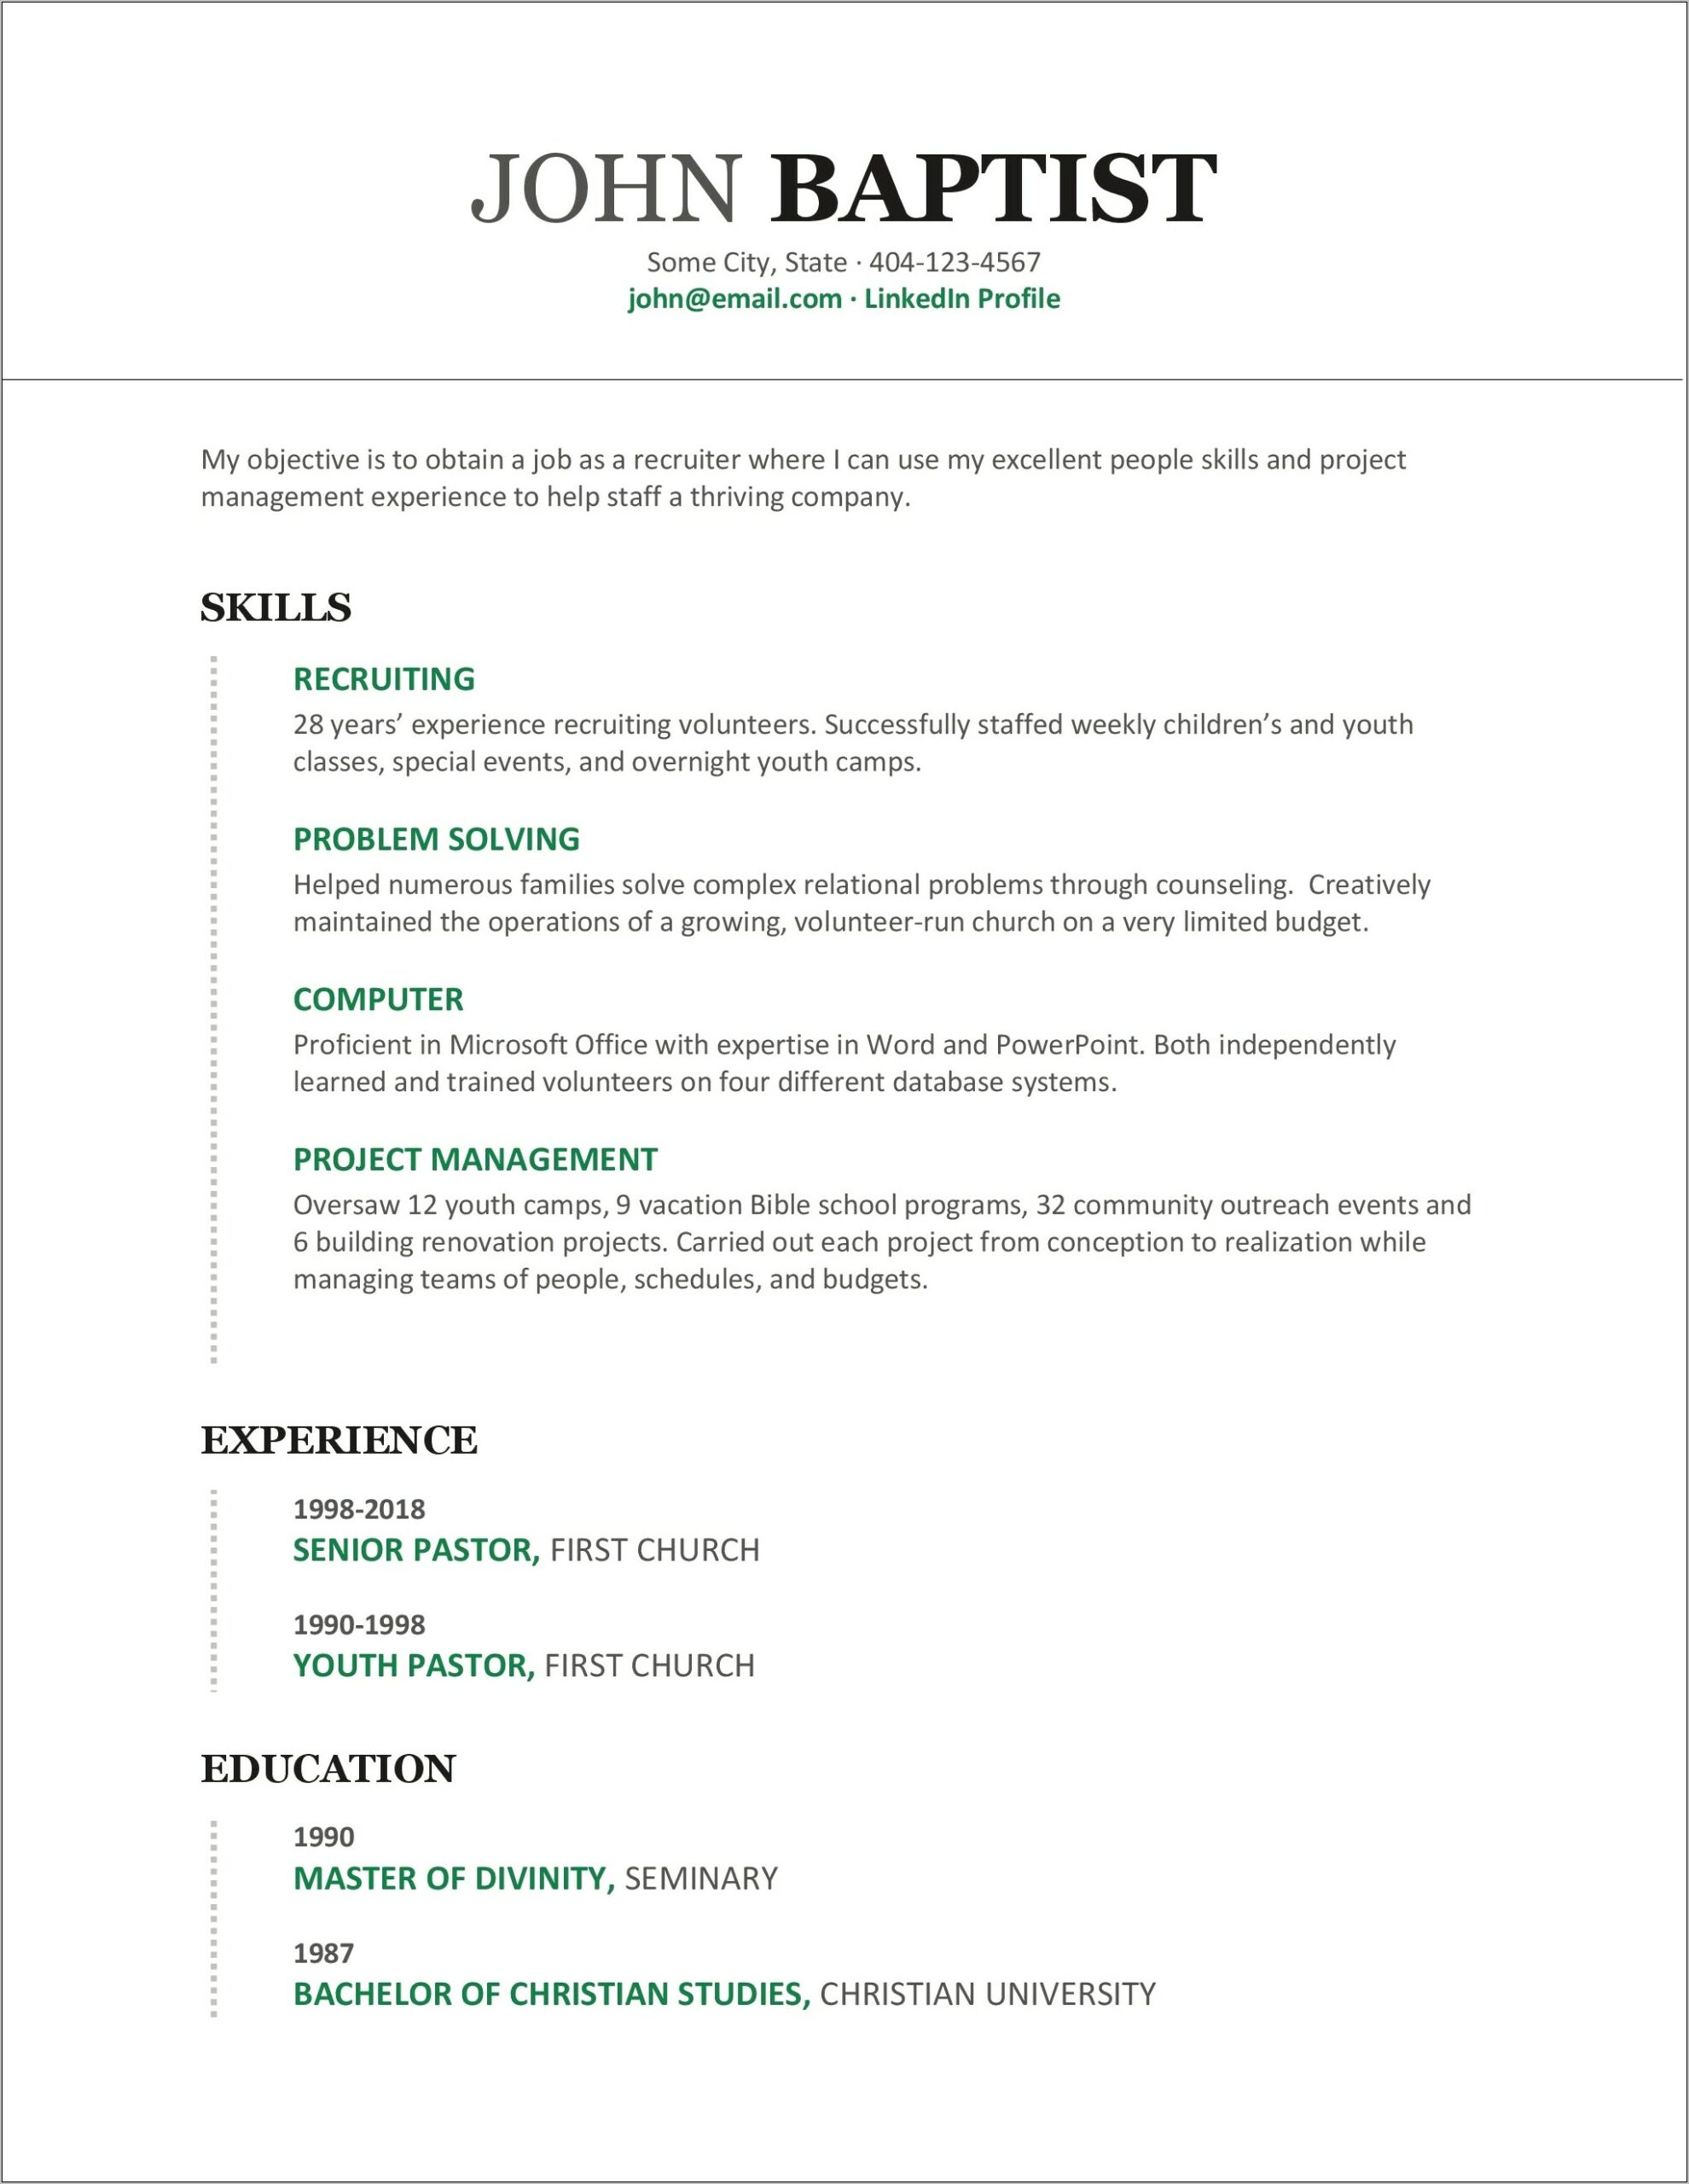 Sample Resume For A Recruiter Position